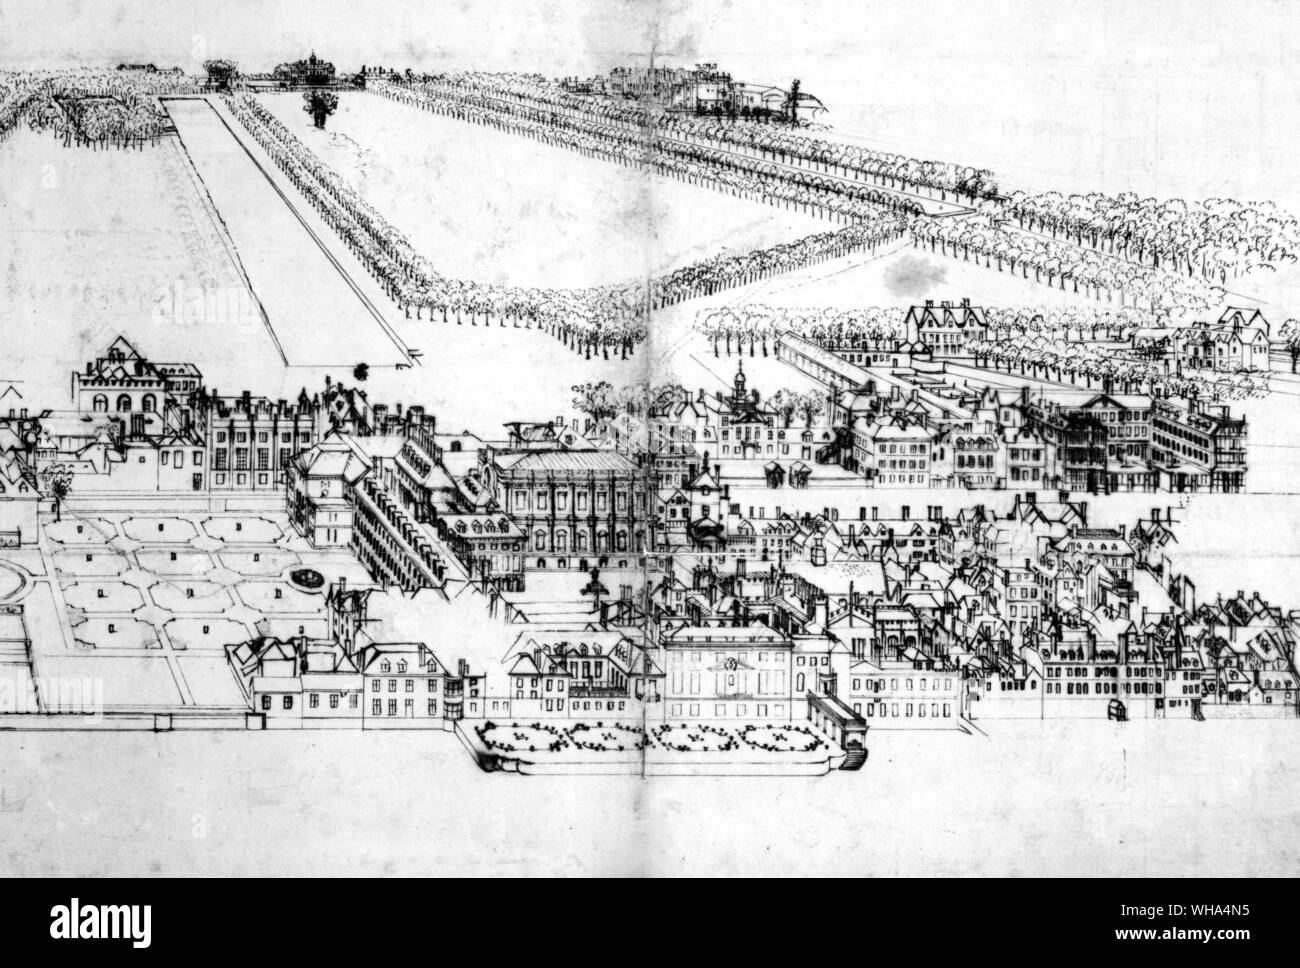 Palace of Whitehall, c.1694. The Banqueting House is in the centre with the Horse Guiards to its right and the Privy Garden on the left. The buildings were used both as official lodgings and as government offices. Across St James's Park, and close by the recently constructed ornamental water, les Arlington House (occupying roughly the site of the modern Buckingham palace), and (to the right), St James's Palace. Taken from Pepys, Samuel English diarist and naval administrator; kept diary 1660-1669 (published 1893-1899); president of Royal Society 1684-1686  1633-1703 Stock Photo